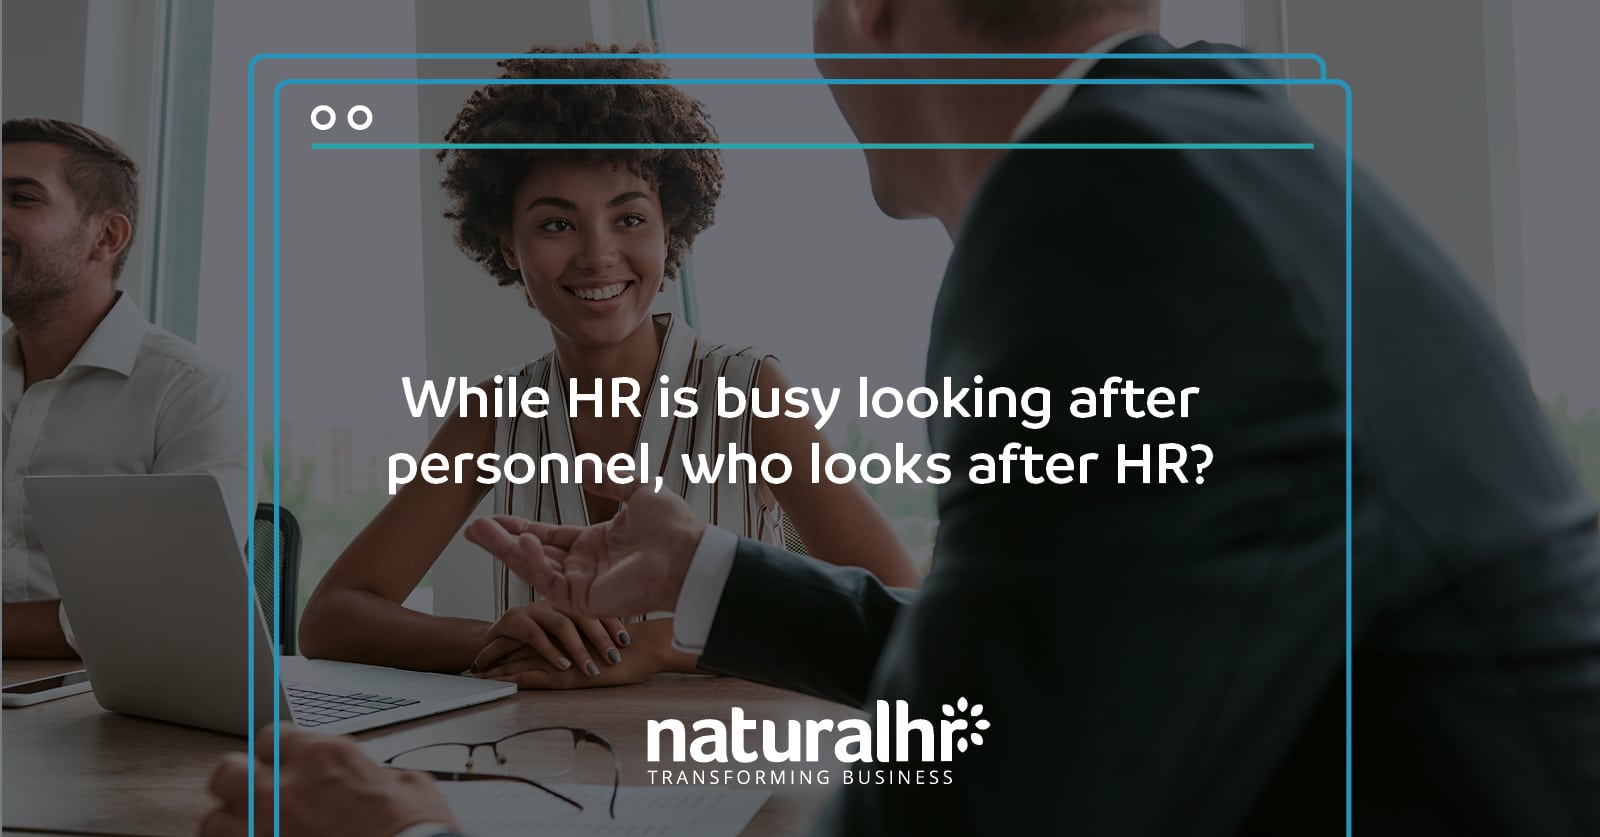 While HR is busy looking after personnel, who looks after HR?